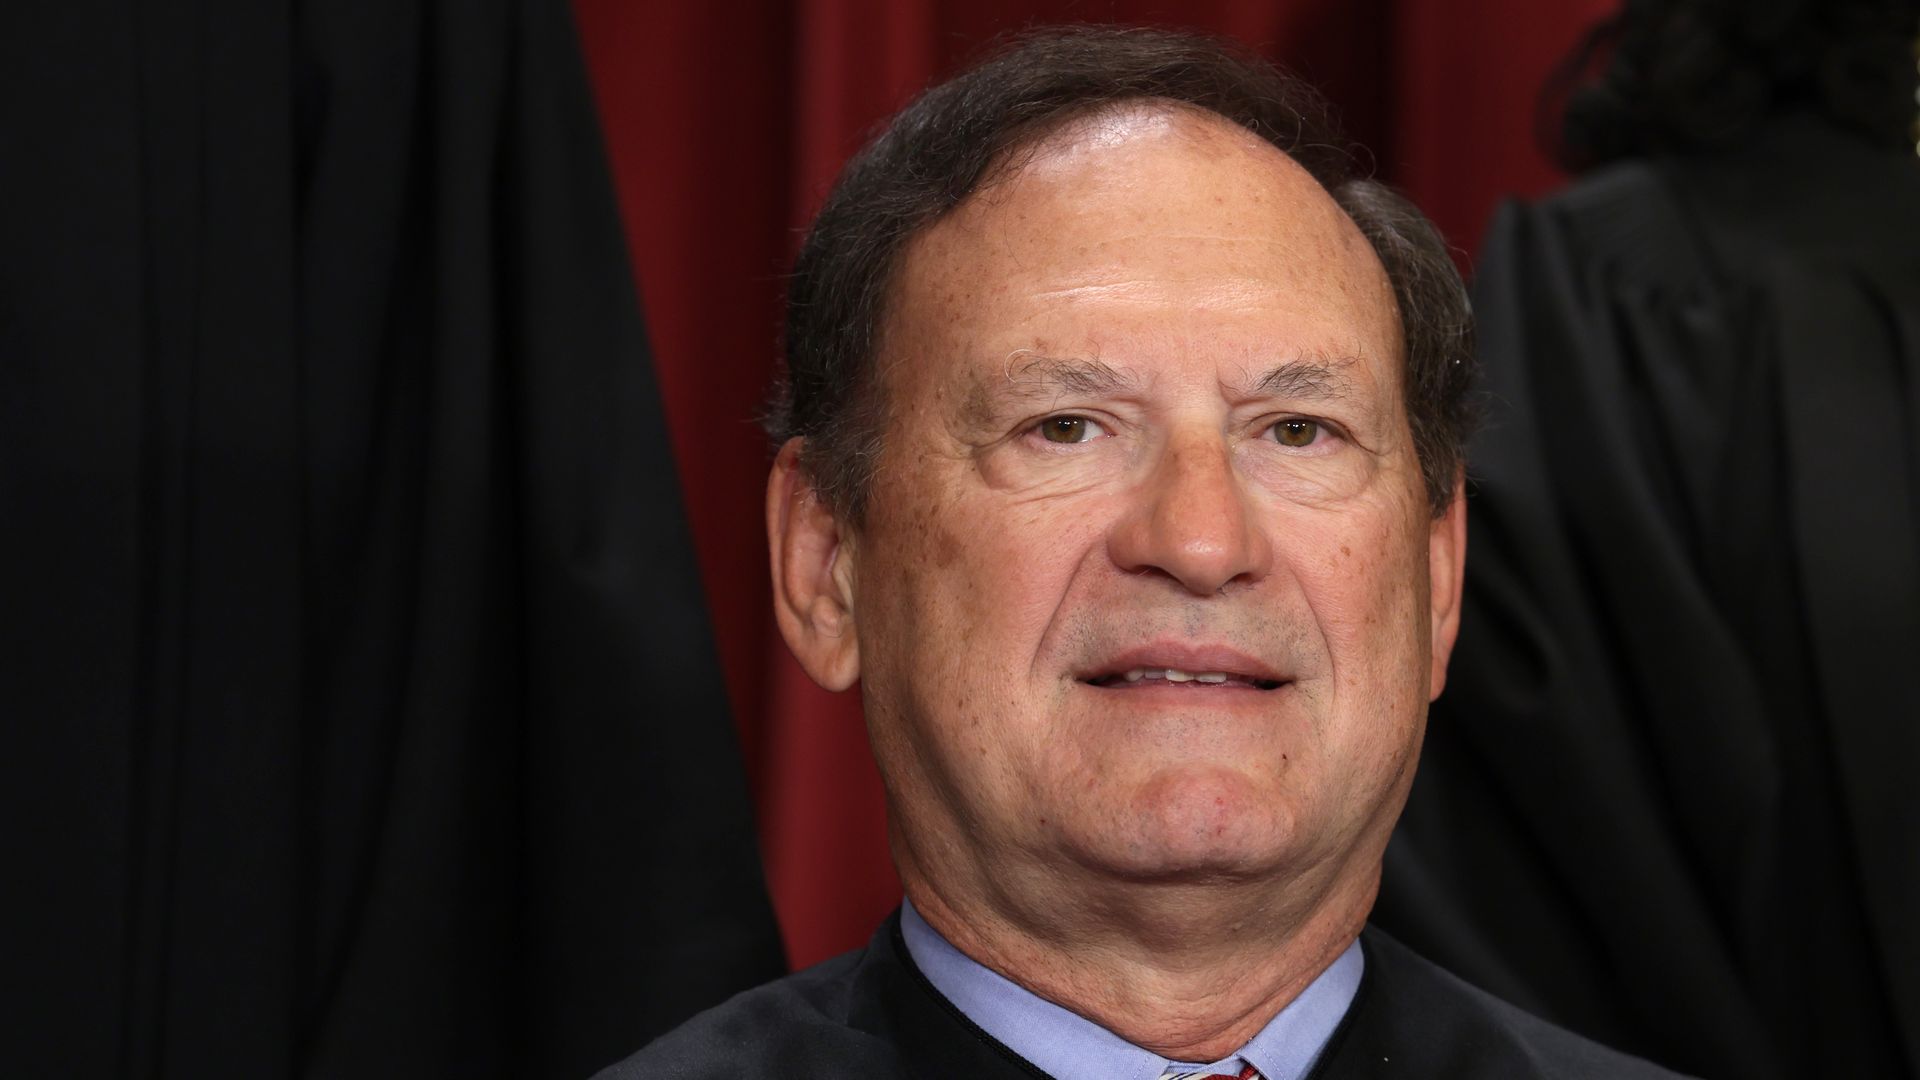 U.S.  Supreme Court Associate Justice Samuel Alito poses for an official portrait at the East Conference Room of the Supreme Court building on October 7, 2022 in Washington, DC. 